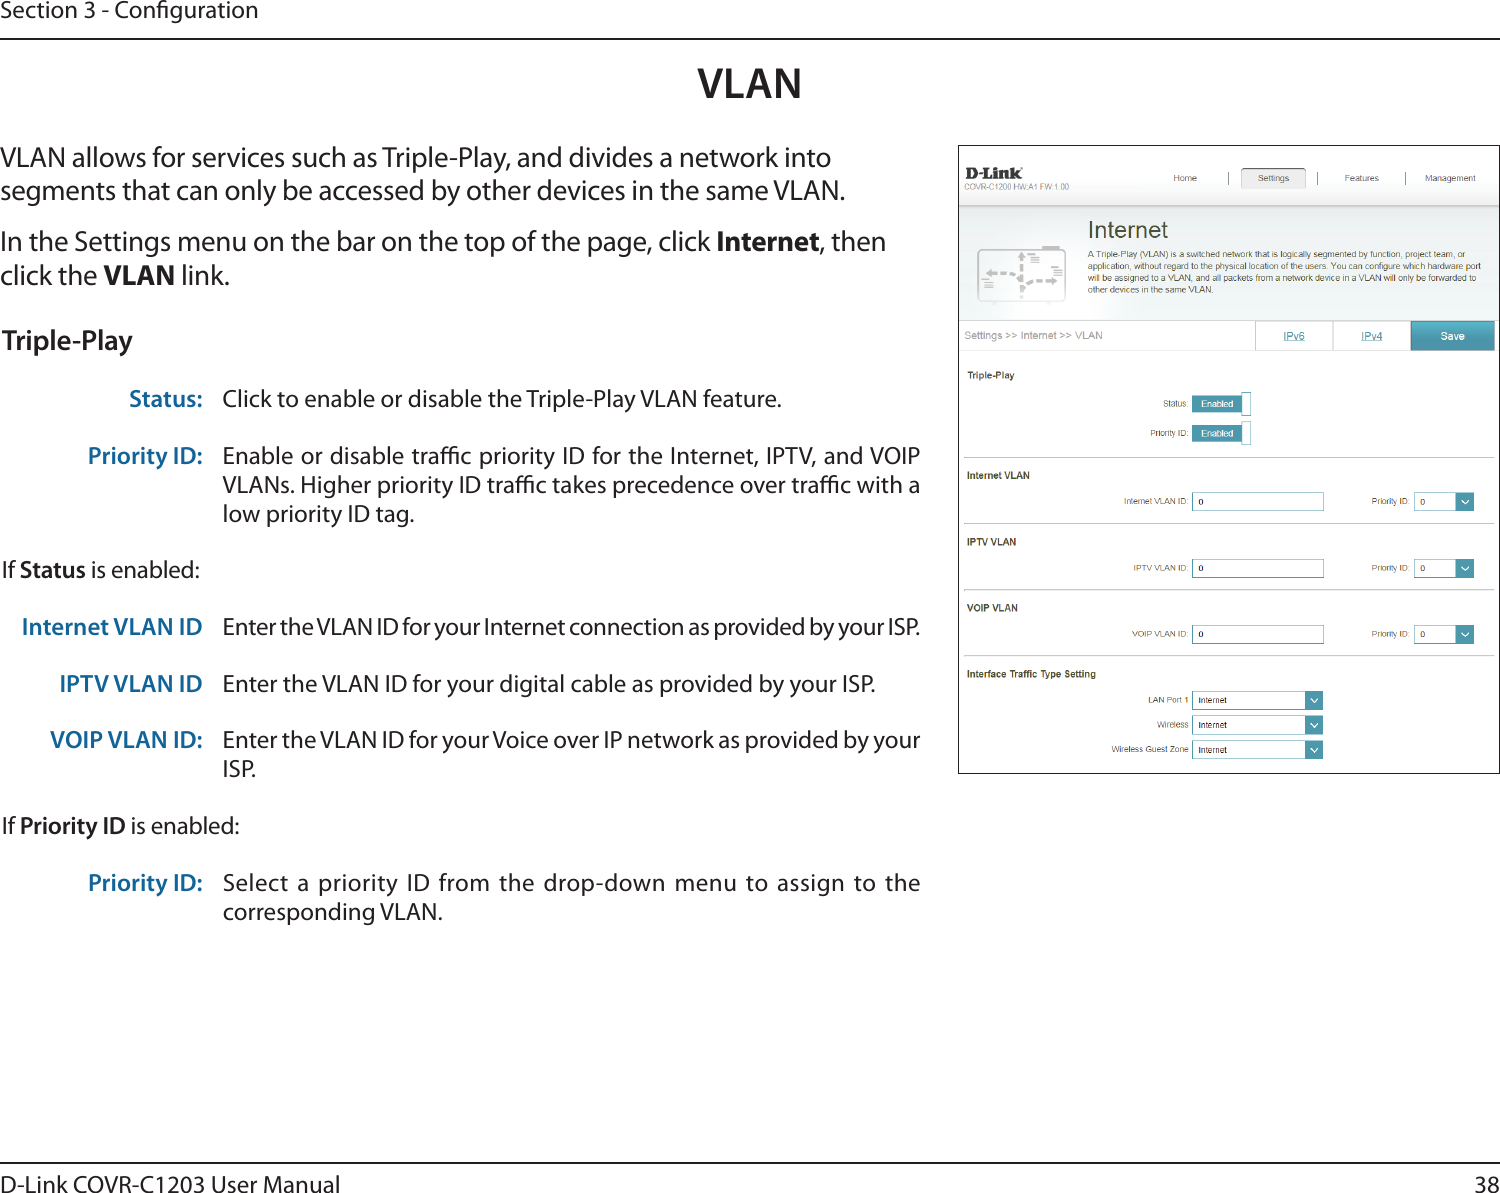 38D-Link COVR-C1203 User ManualSection 3 - CongurationVLANVLAN allows for services such as Triple-Play, and divides a network into segments that can only be accessed by other devices in the same VLAN.In the Settings menu on the bar on the top of the page, click Internet, then click the VLAN link. Triple-PlayStatus: Click to enable or disable the Triple-Play VLAN feature. Priority ID: Enable or disable trac priority ID for the Internet, IPTV, and VOIP VLANs. Higher priority ID trac takes precedence over trac with a low priority ID tag.If Status is enabled:Internet VLAN ID Enter the VLAN ID for your Internet connection as provided by your ISP.IPTV VLAN ID Enter the VLAN ID for your digital cable as provided by your ISP. VOIP VLAN ID: Enter the VLAN ID for your Voice over IP network as provided by your ISP. If Priority ID is enabled:Priority ID: Select a priority ID from the drop-down menu to assign to the corresponding VLAN.